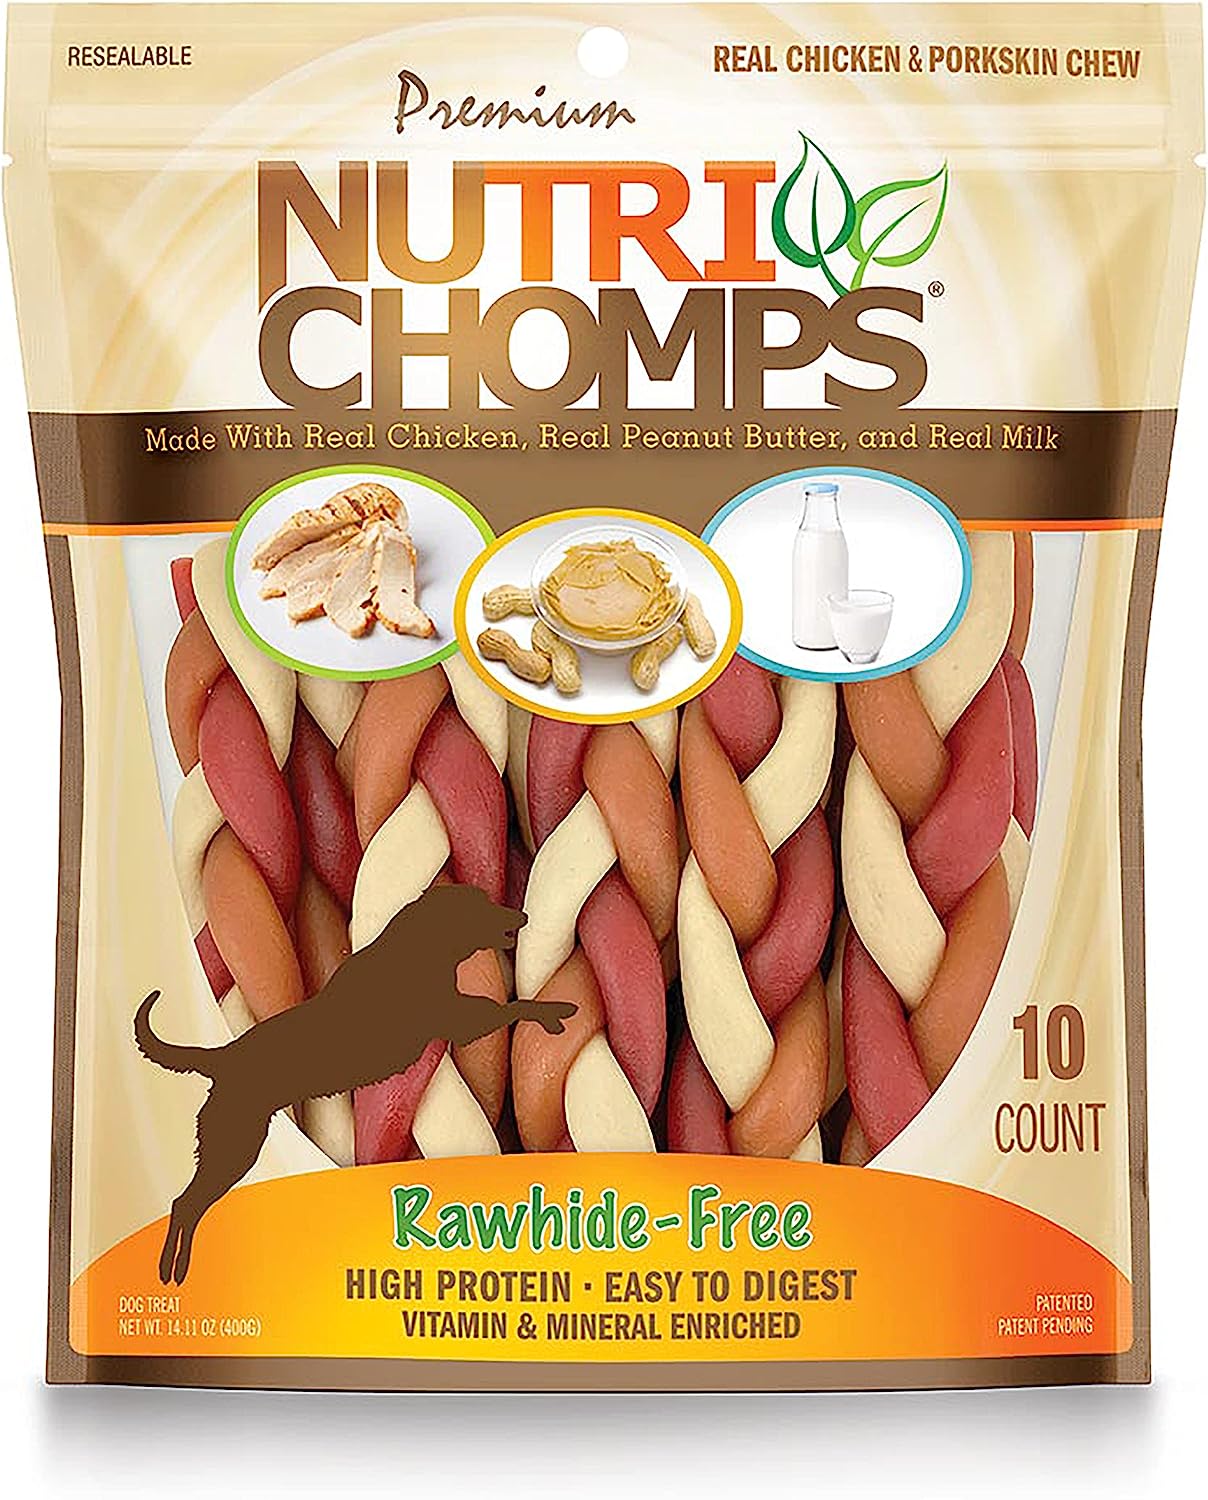 NutriChomps Dog Chews, 6-inch Braids, Easy to Digest, Rawhide-Free Dog Treats, Healthy, 10 Count, Real Chicken, Peanut Butter and Milk flavors